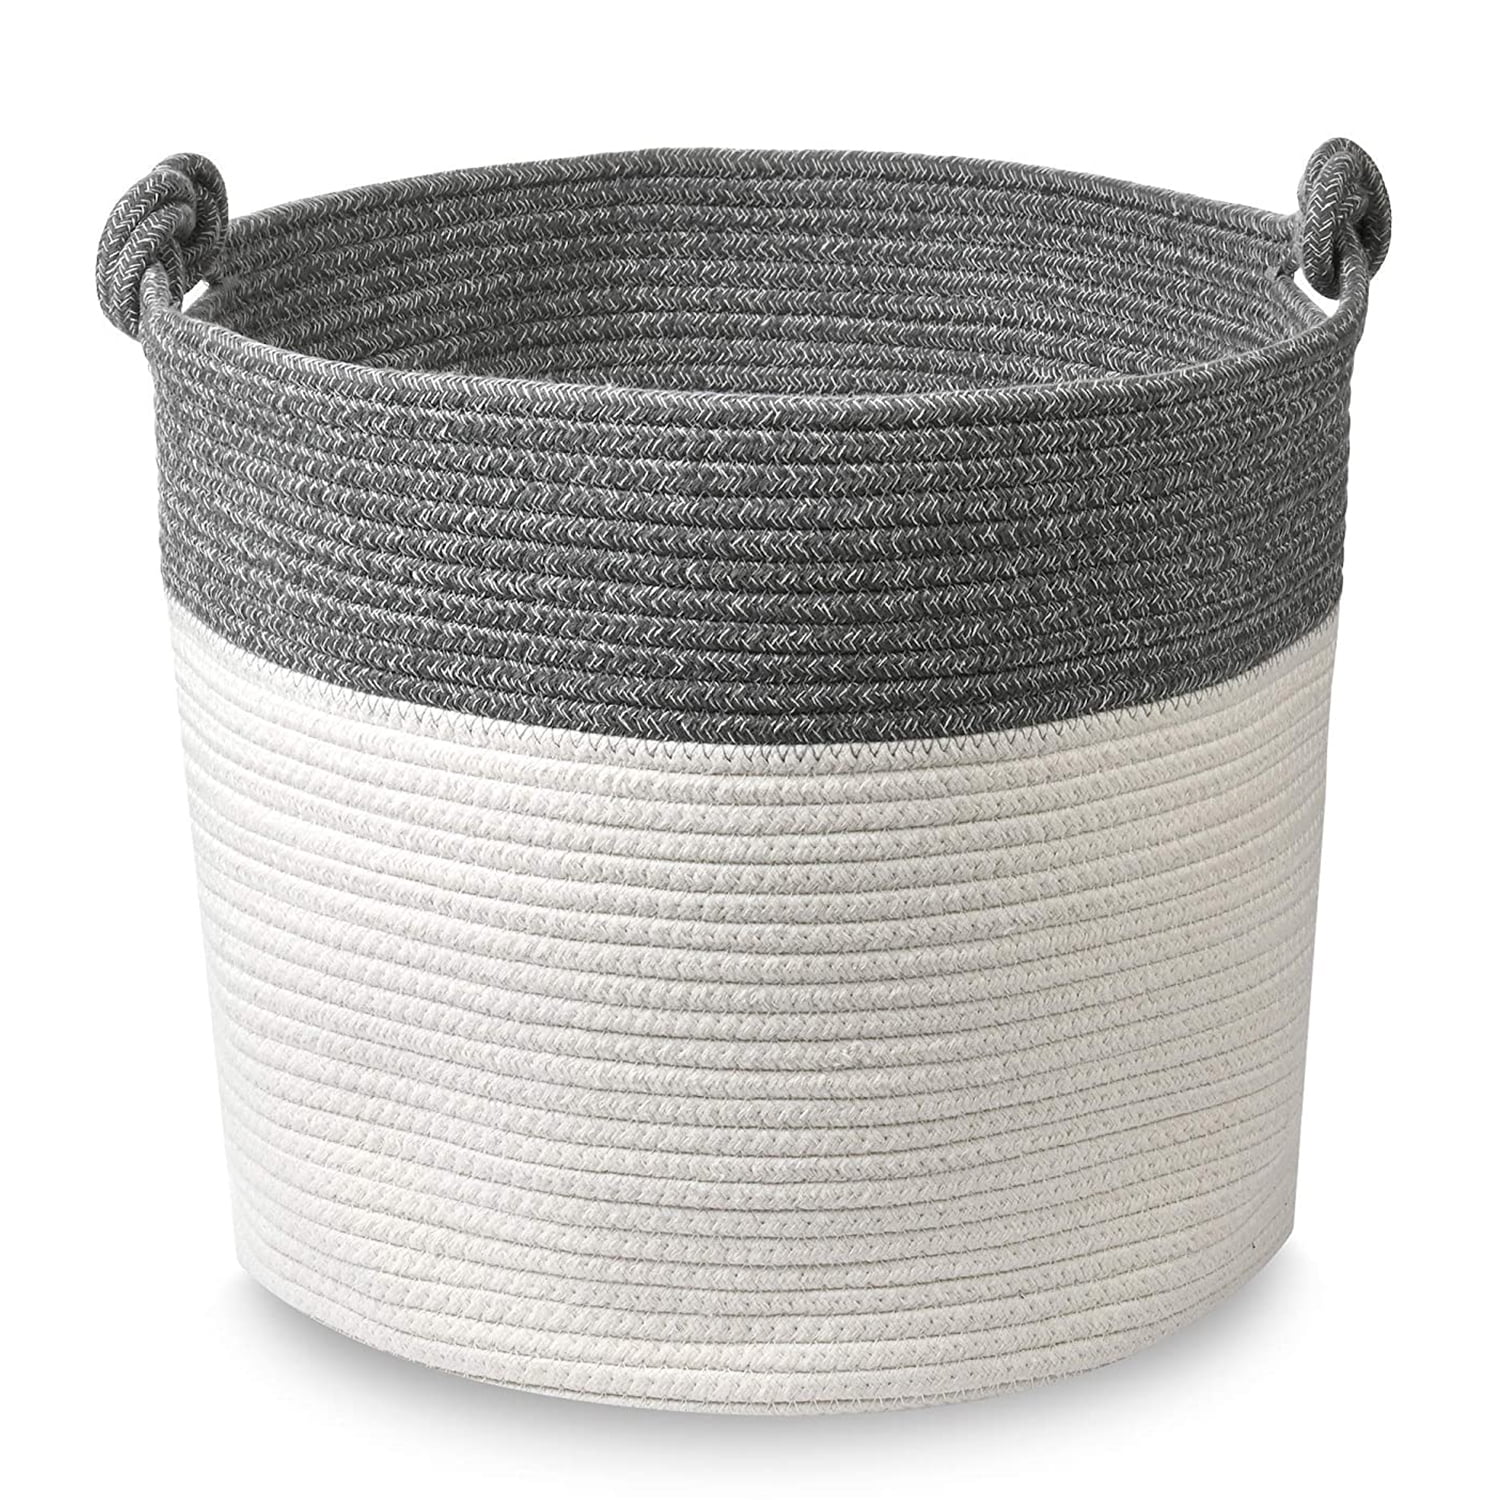 Details about   Blanket Basket Large Storage Woven Baskets for Organizing Rope Cotton Decorative 